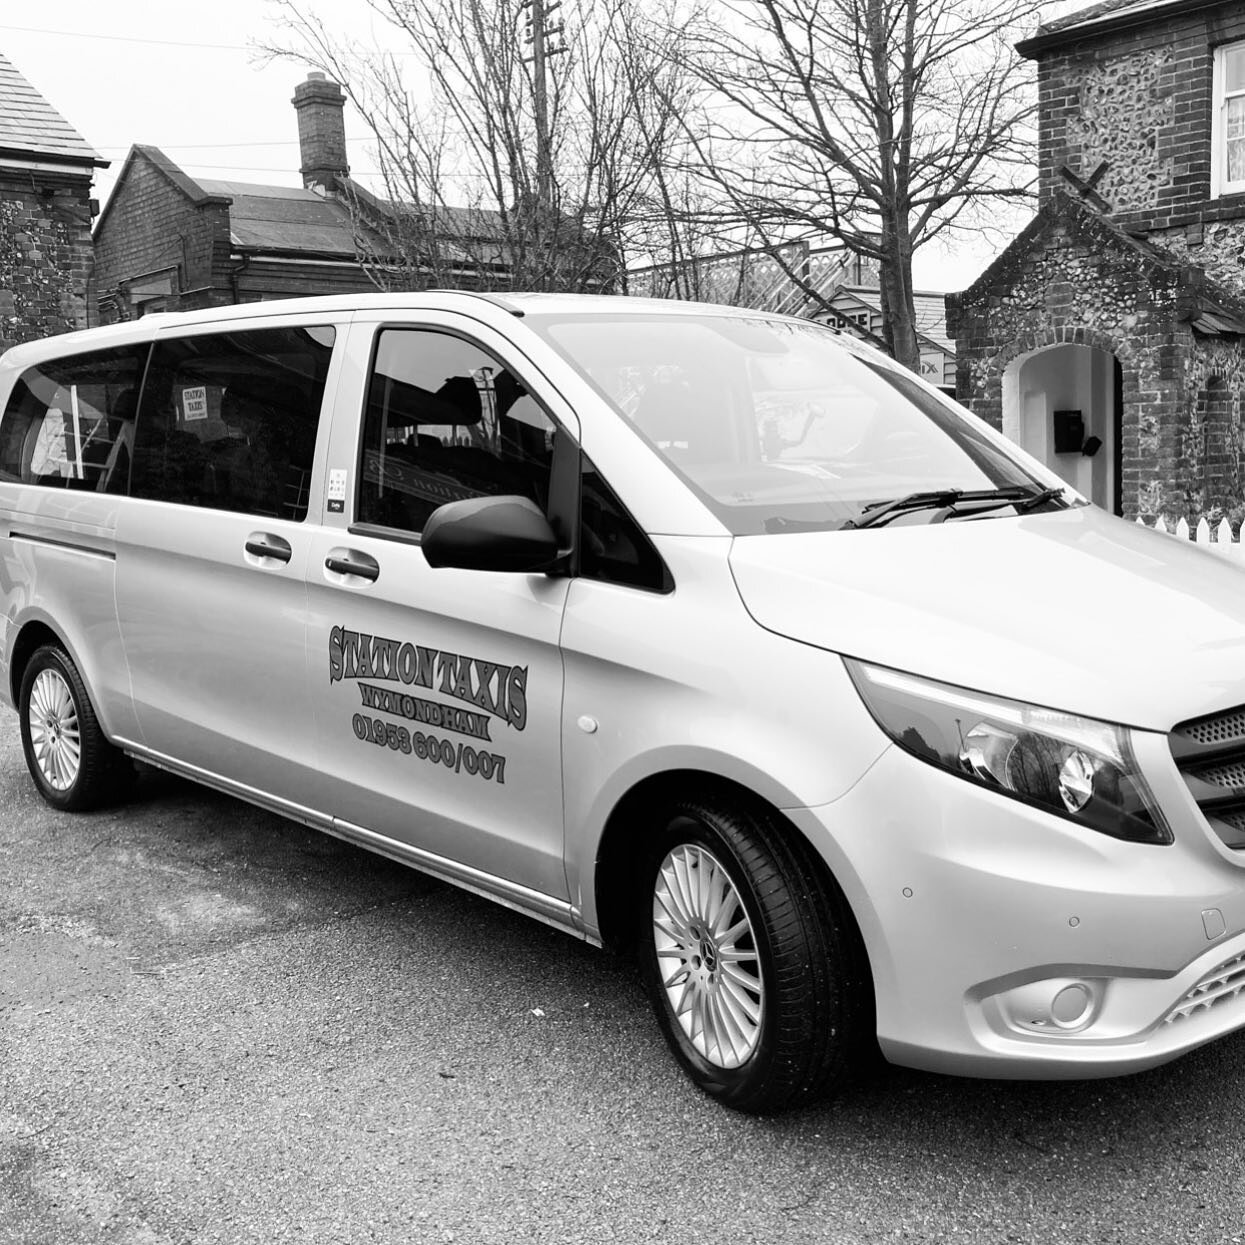 Book now for your quick &amp; easy Covid jab transport. 07765 402602.  Covering attleborough, wymondham, hethersett &amp; Norwich vaccination centres. #covid_19 #vaccinate #letsdothis #inthistogether #2021goals #norfolk #taxi #transport